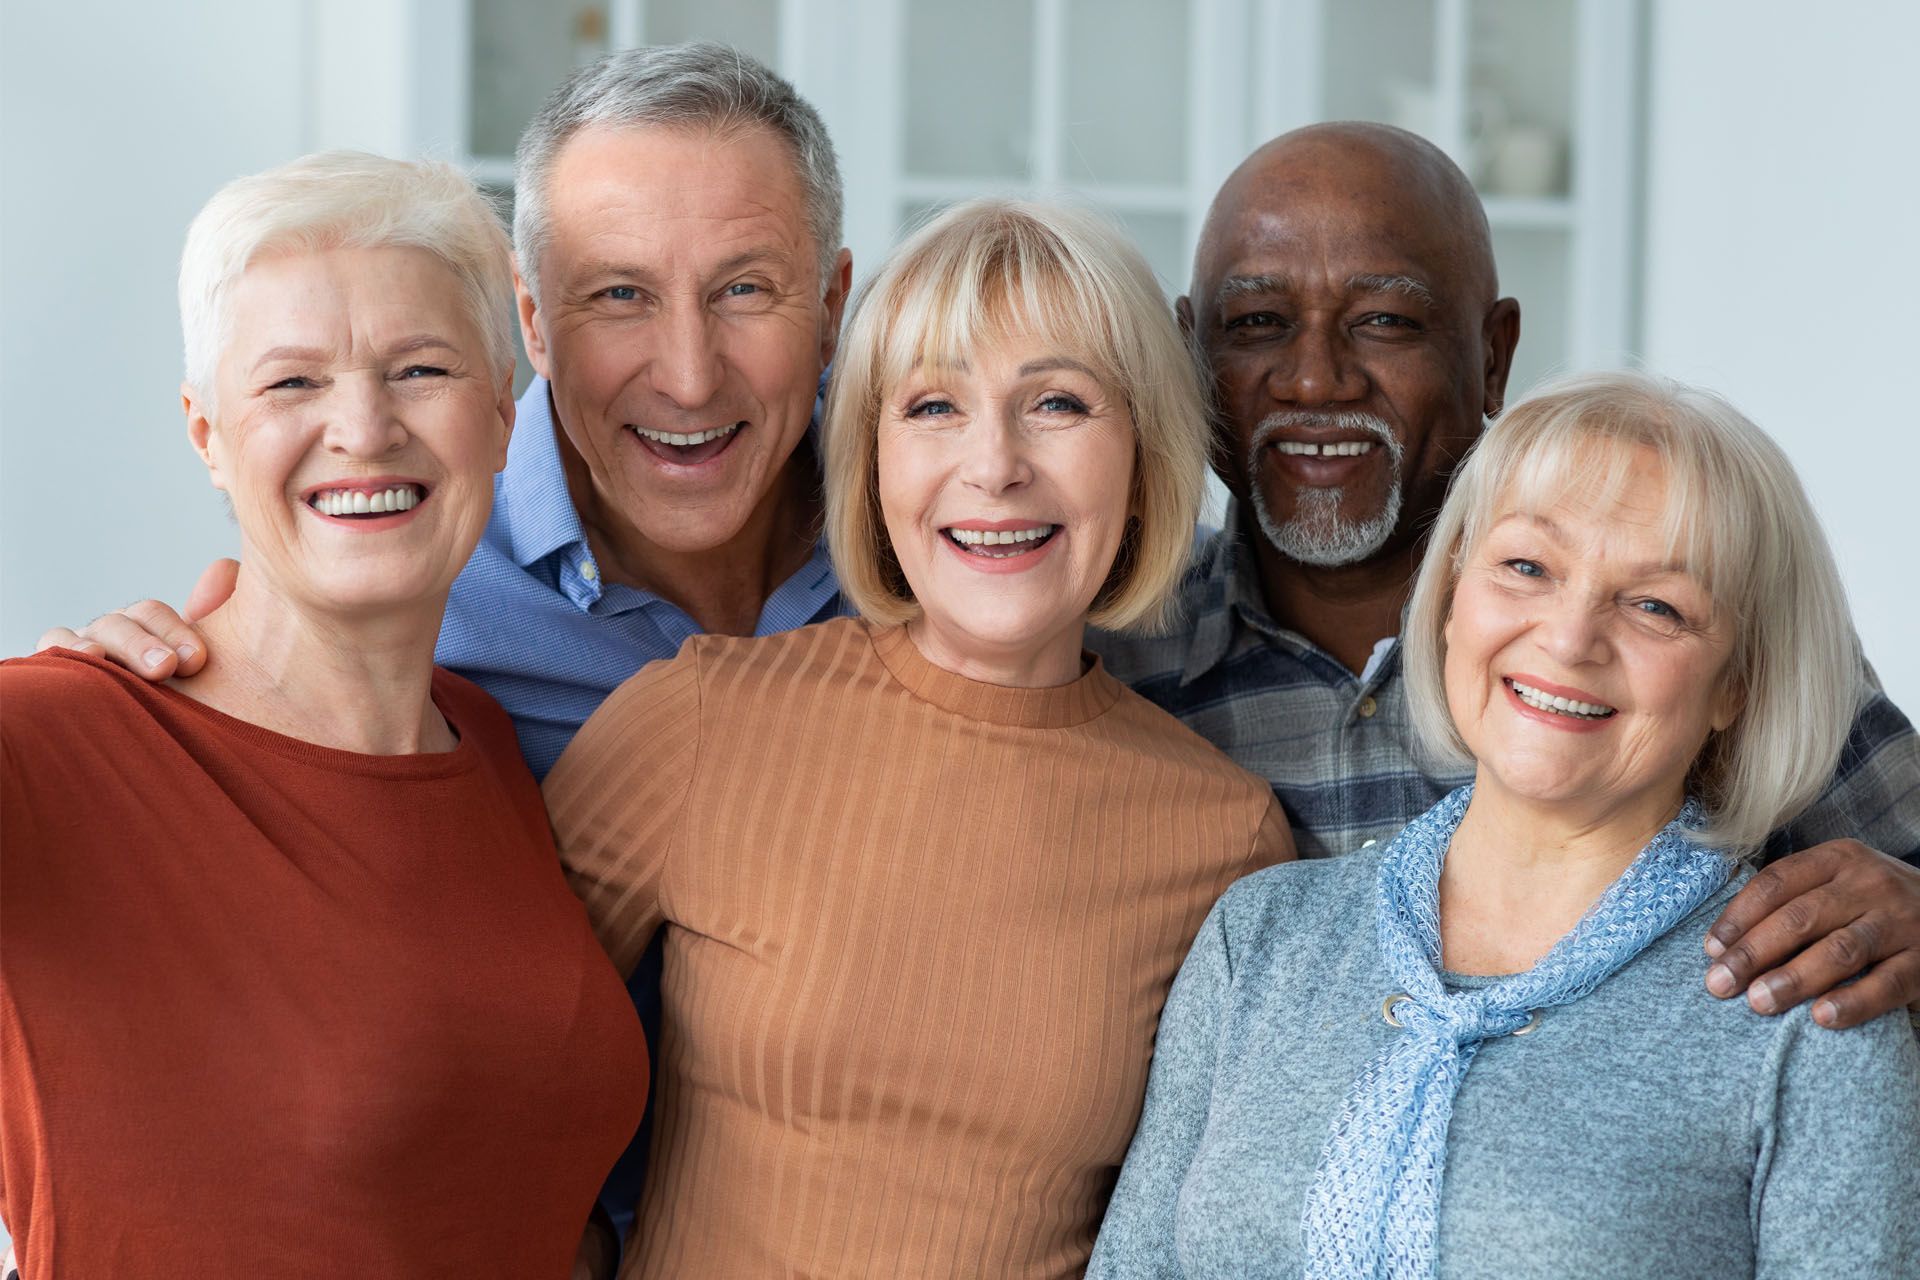 group of elderly people together and smiling